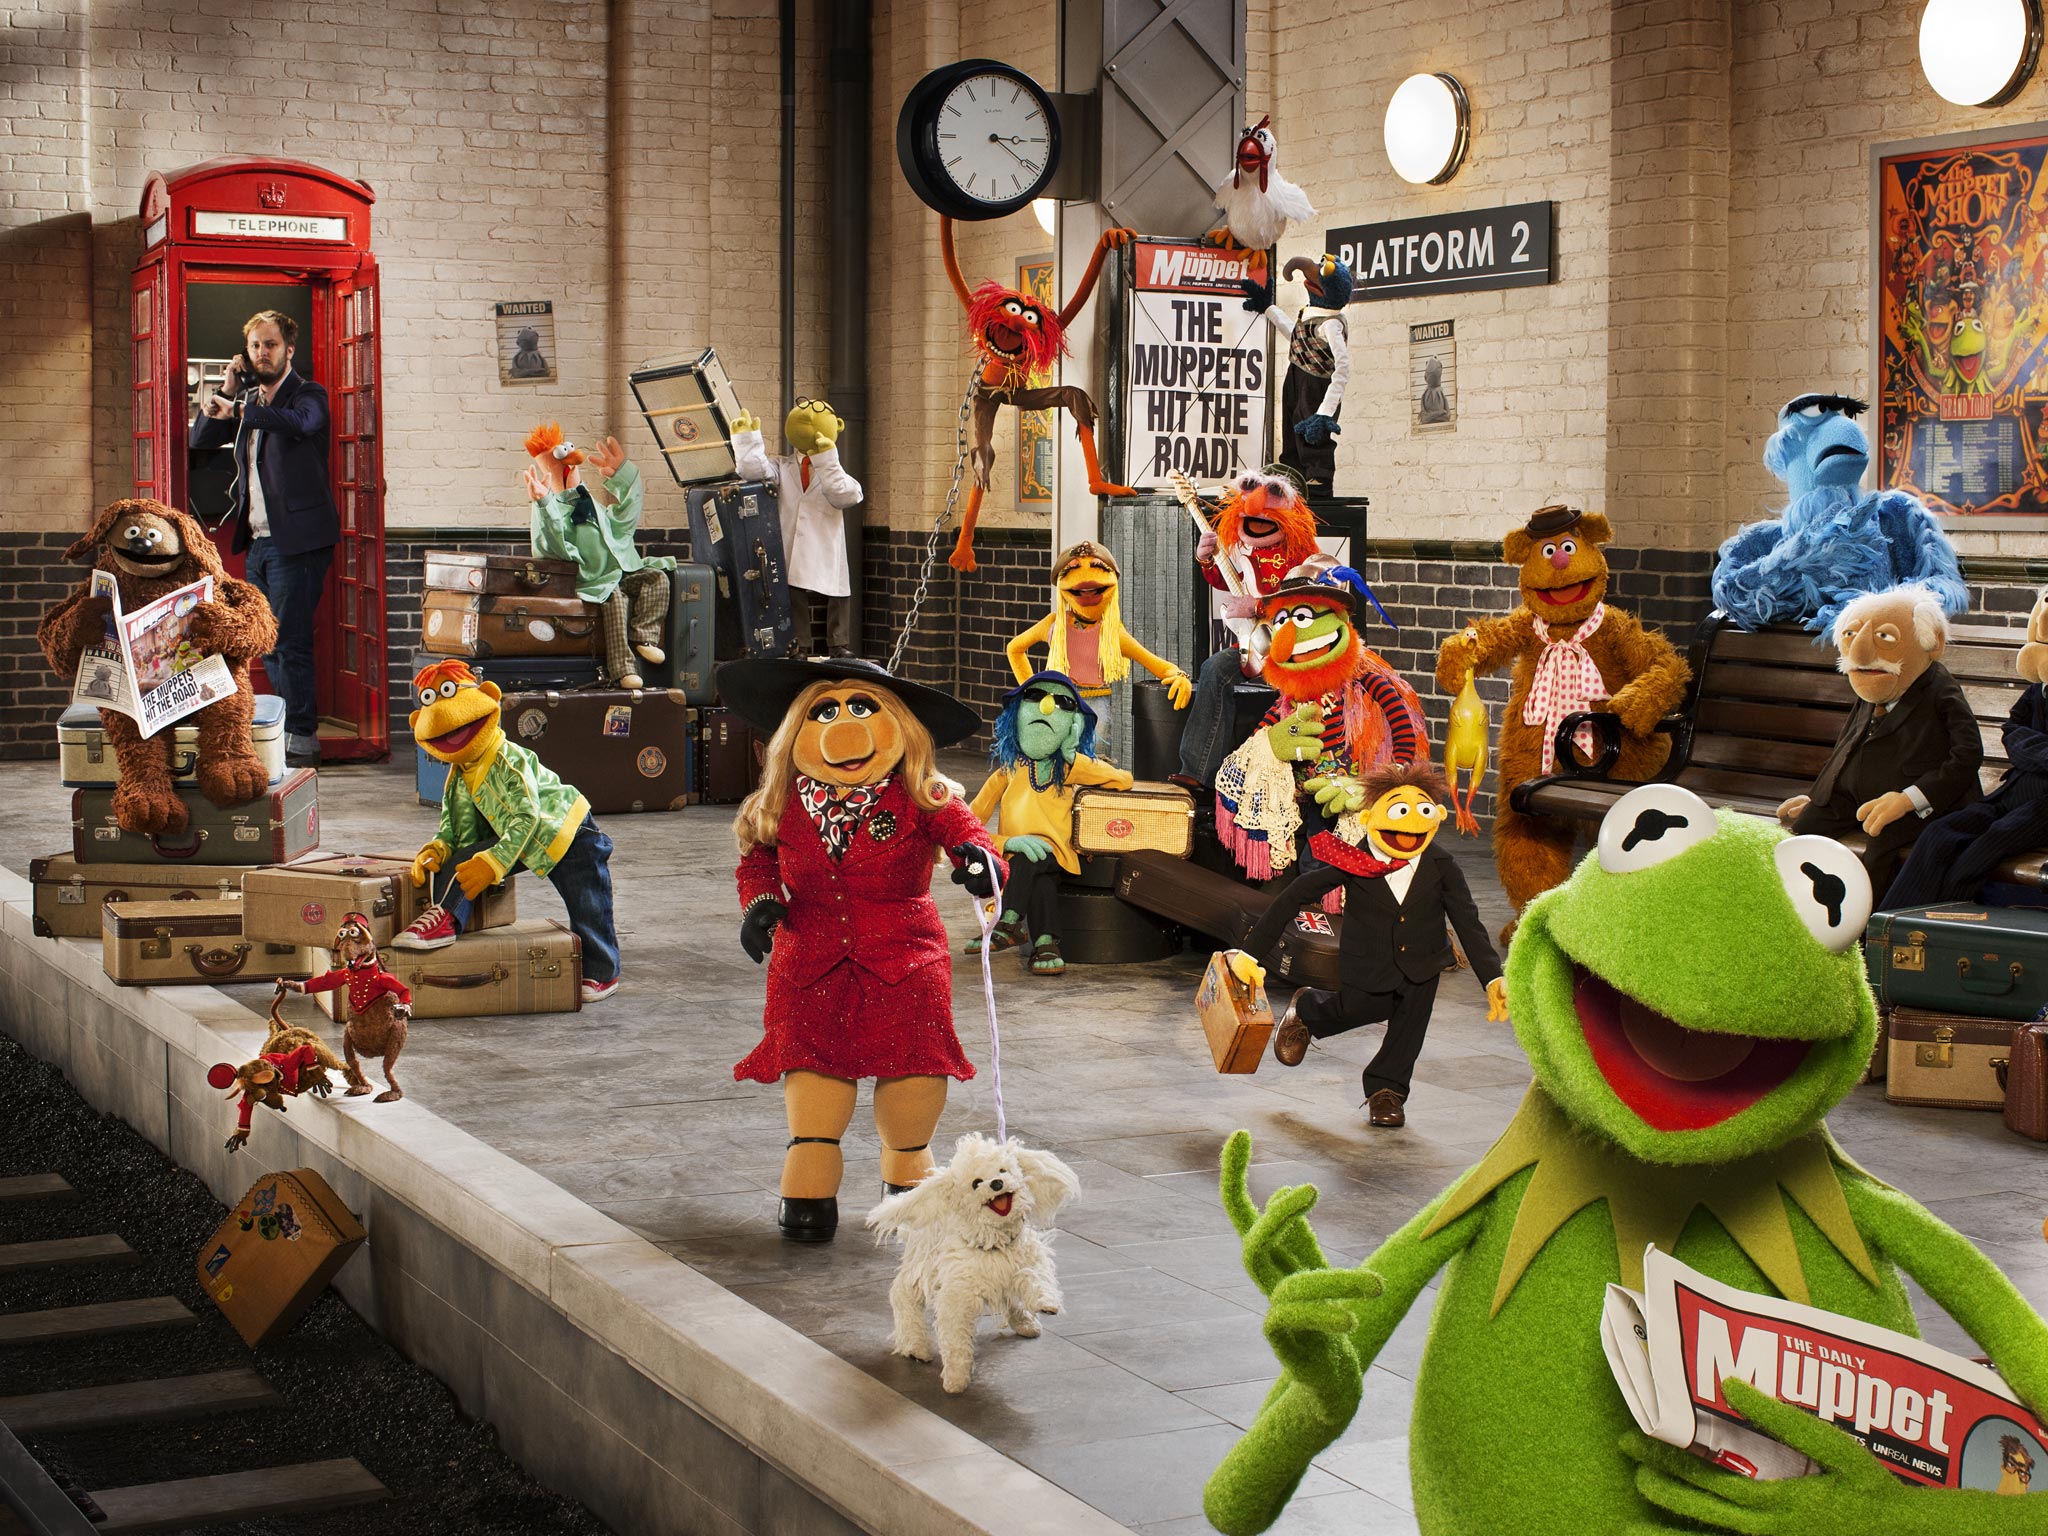 Kermit and Miss Piggy are back in 'Muppets most wanted'